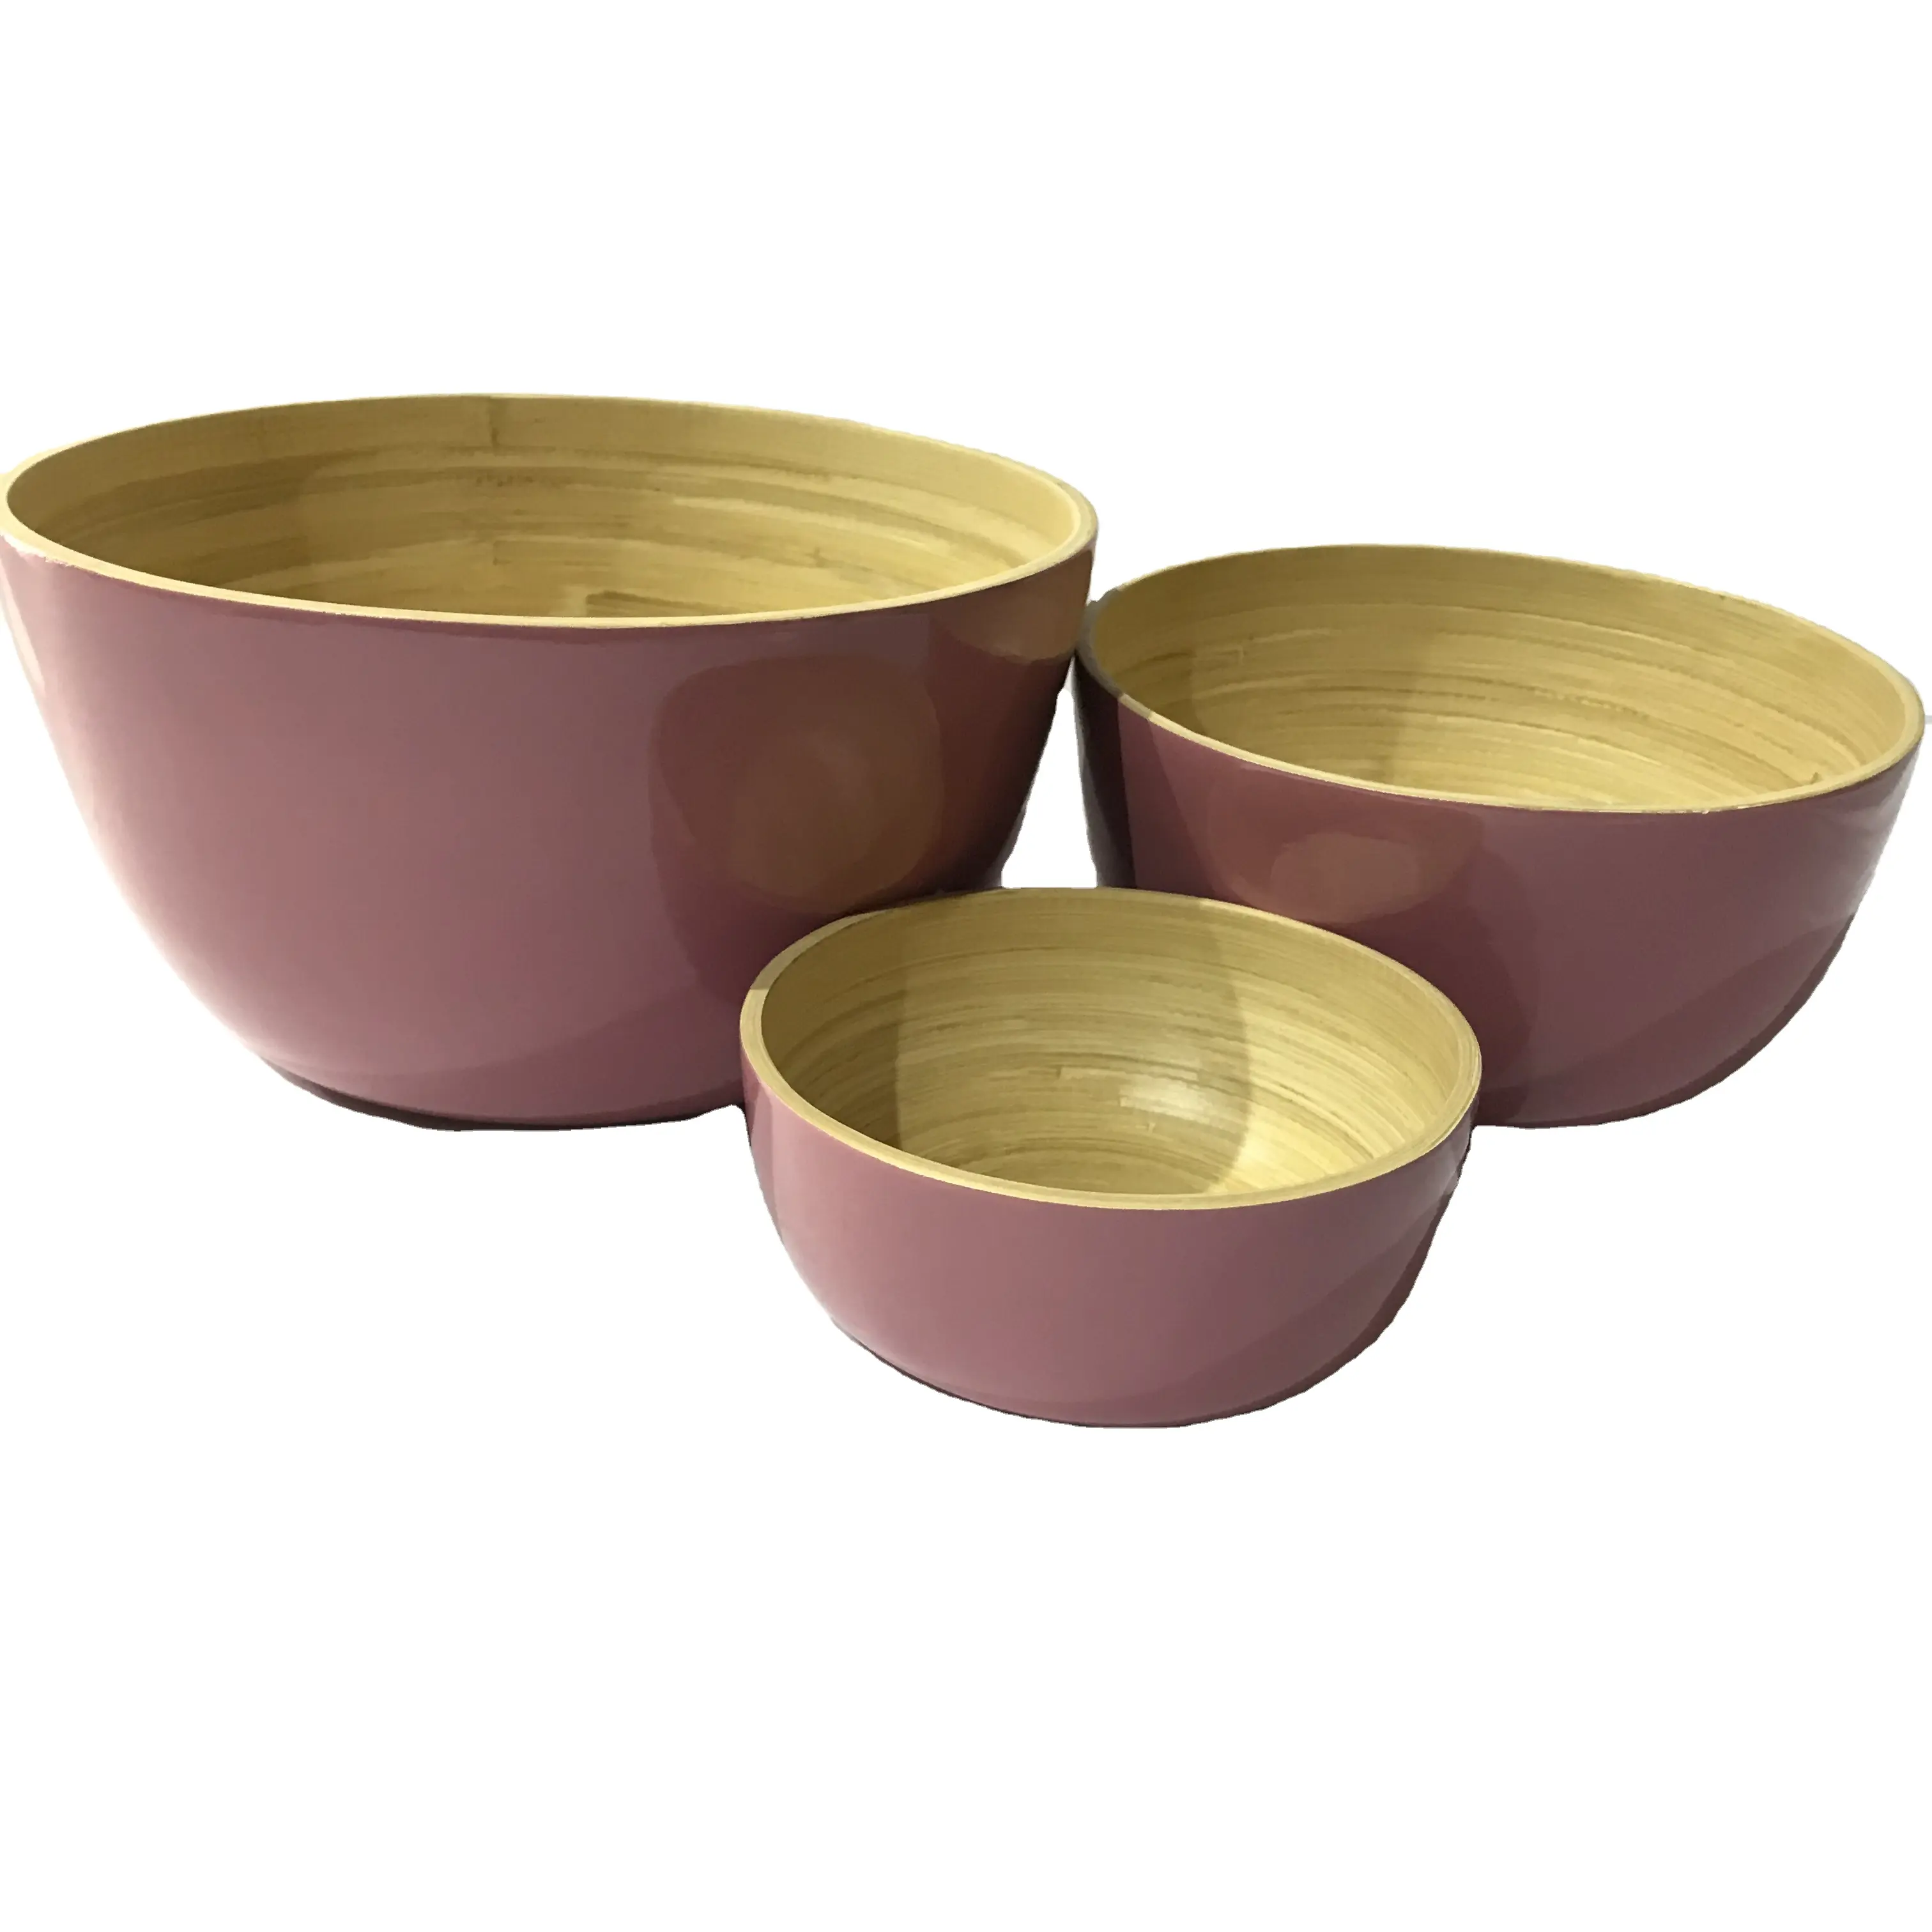 Best selling hot item set of 3 spun bamboo bowls customized colors OEM & ODM kitchenware from Viet Nam